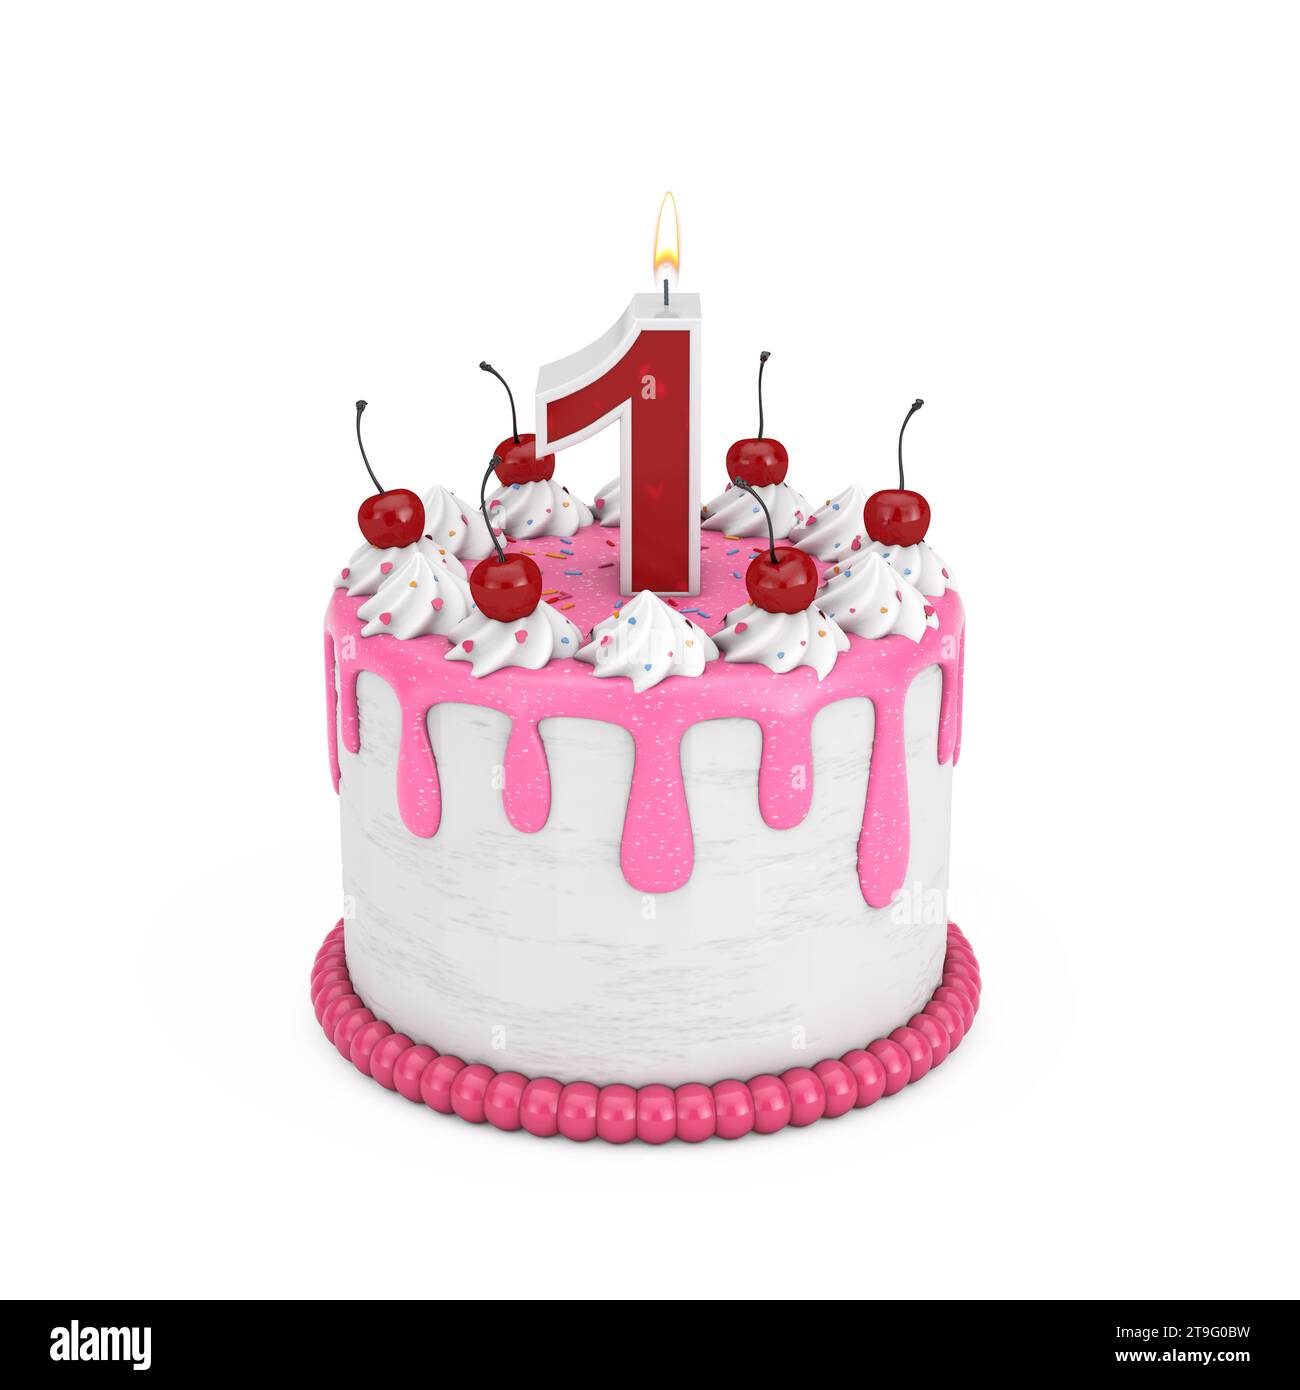 1 Year Birthday Concept. Abstract Birthday Cartoon Dessert Cherry Cake with One Year Anniversary Candle on a white background. 3d Rendering Stock Photo